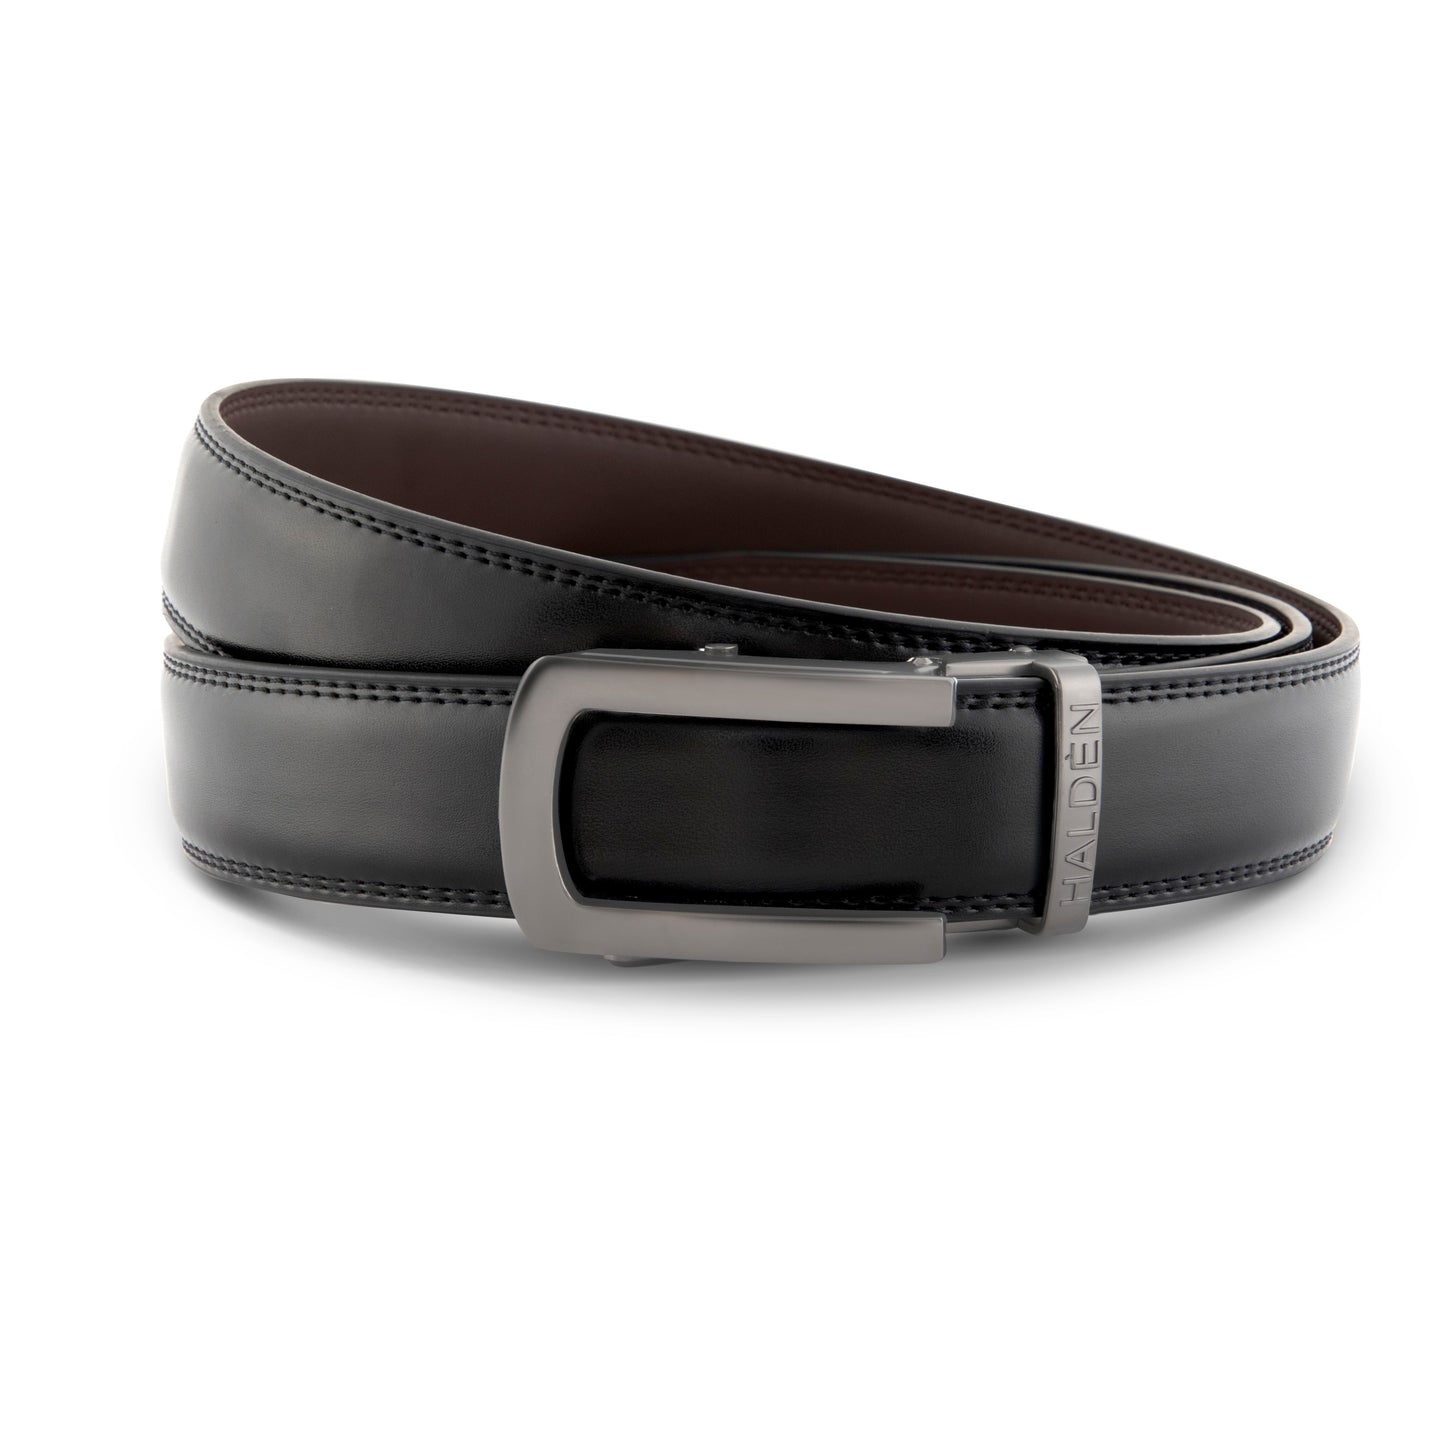 Burley black with classic buckle